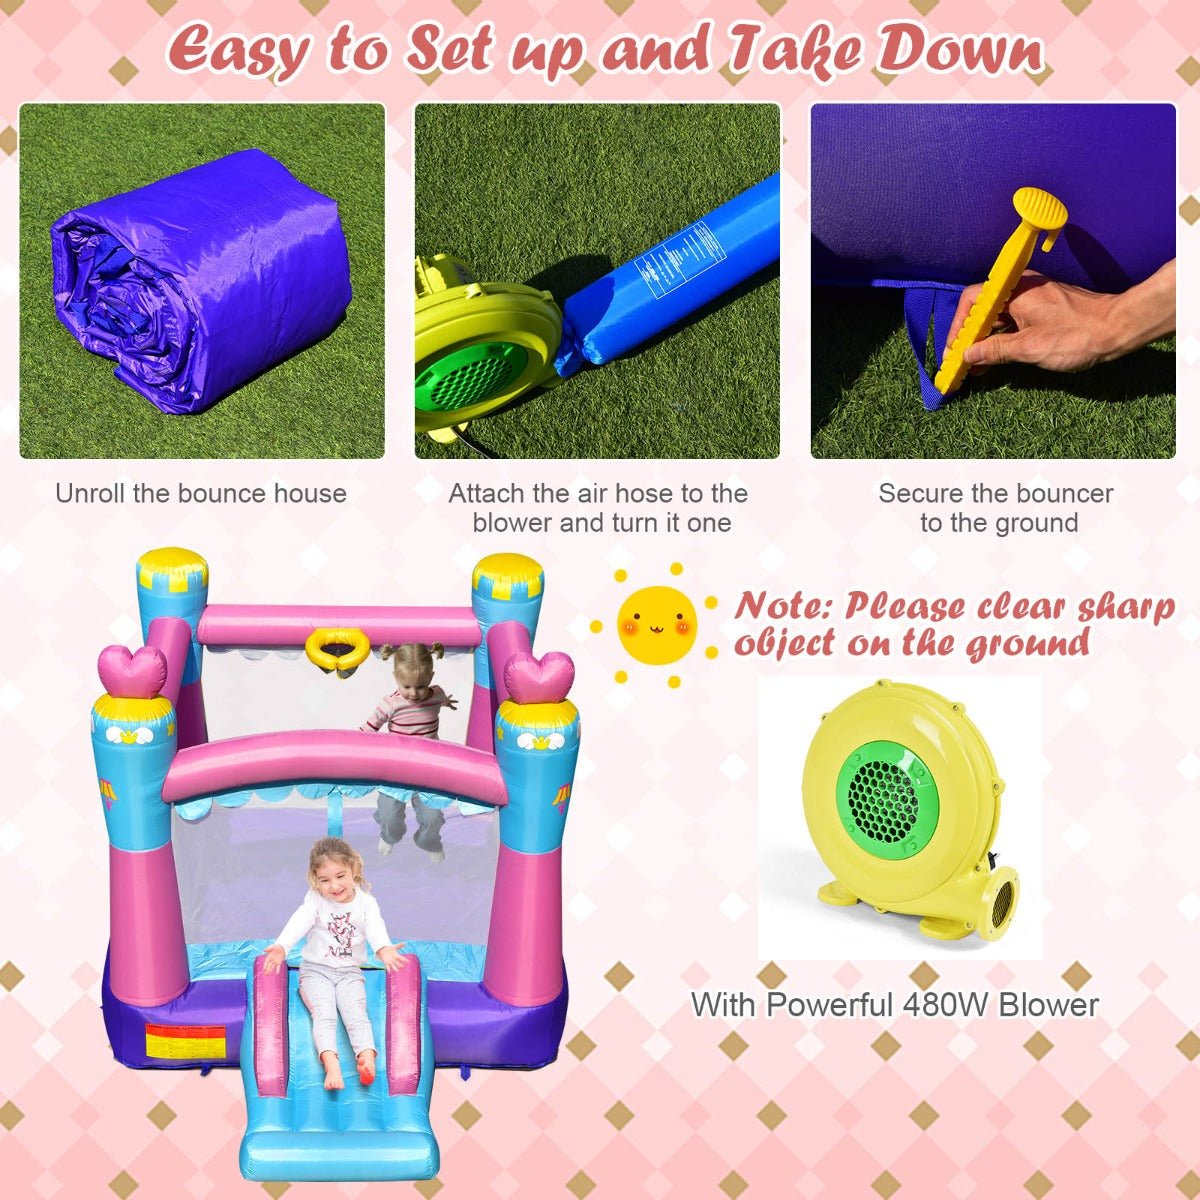 Boundless Laughter: Inflatable Castle with Slide, Trampoline & Hoop